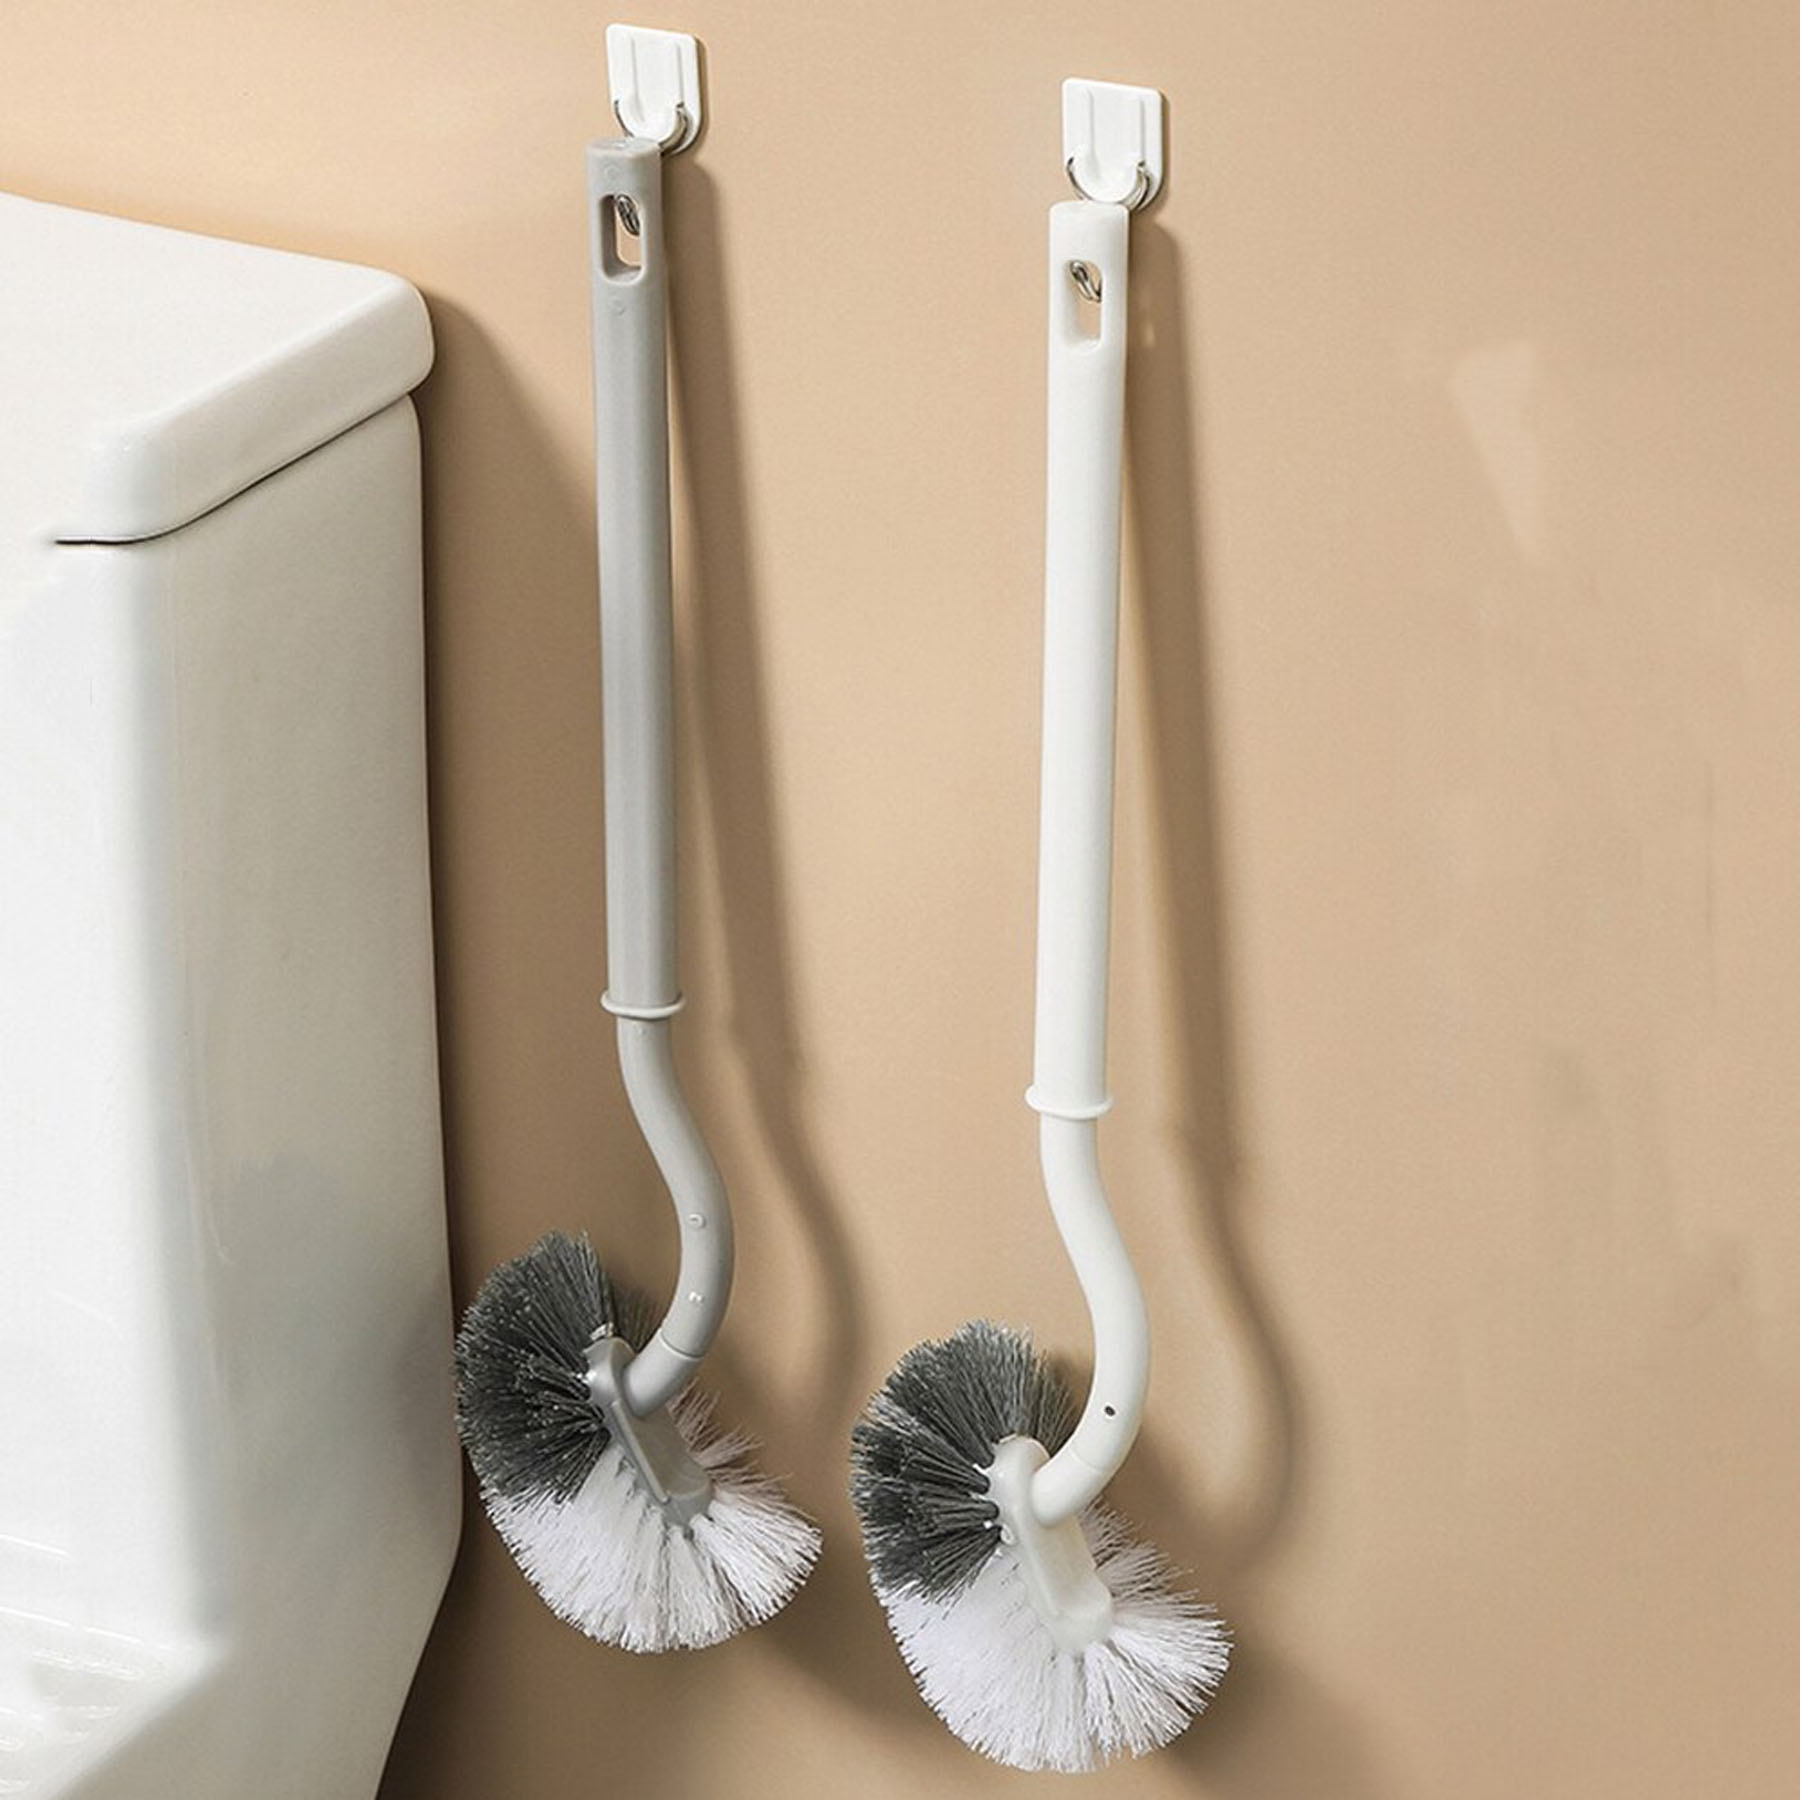 Toilet Brush With Long Handle For Bathroom Cleaning With Soft Bristles